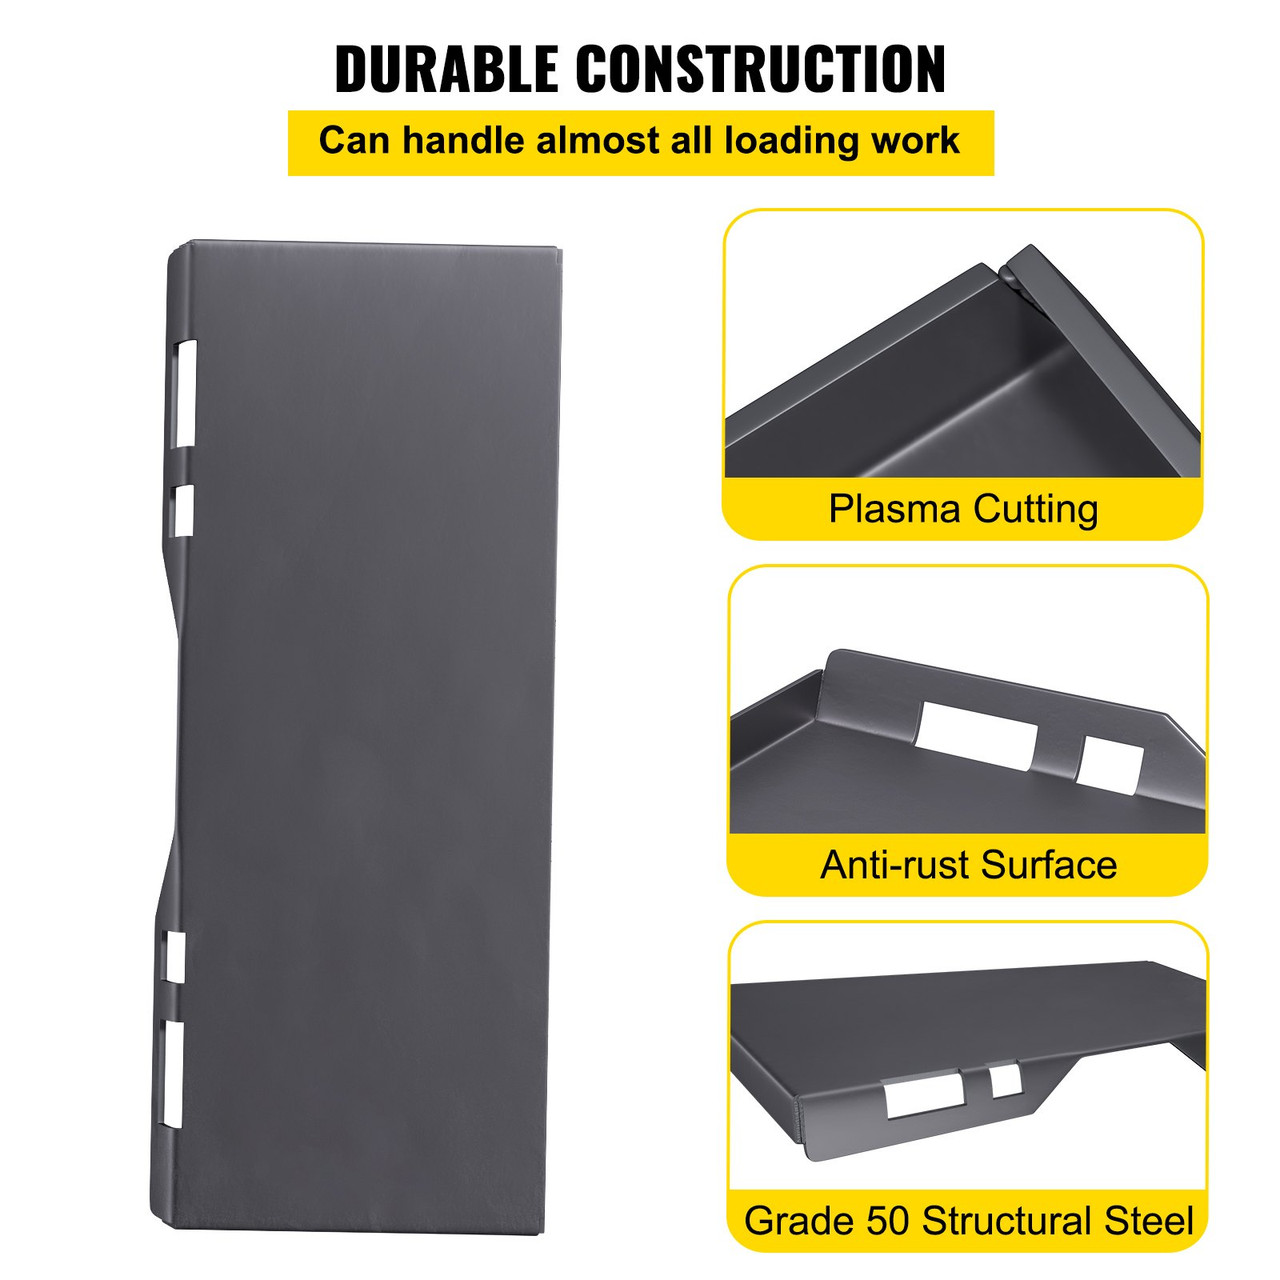 Skid Steer Mount Plate Thick Skid Steer Attachment Plate Steel Quick Attachment Loader Plate with 3 Additional Welding Rods Easy to Weld or Bolt to Different Accessories (1/4")